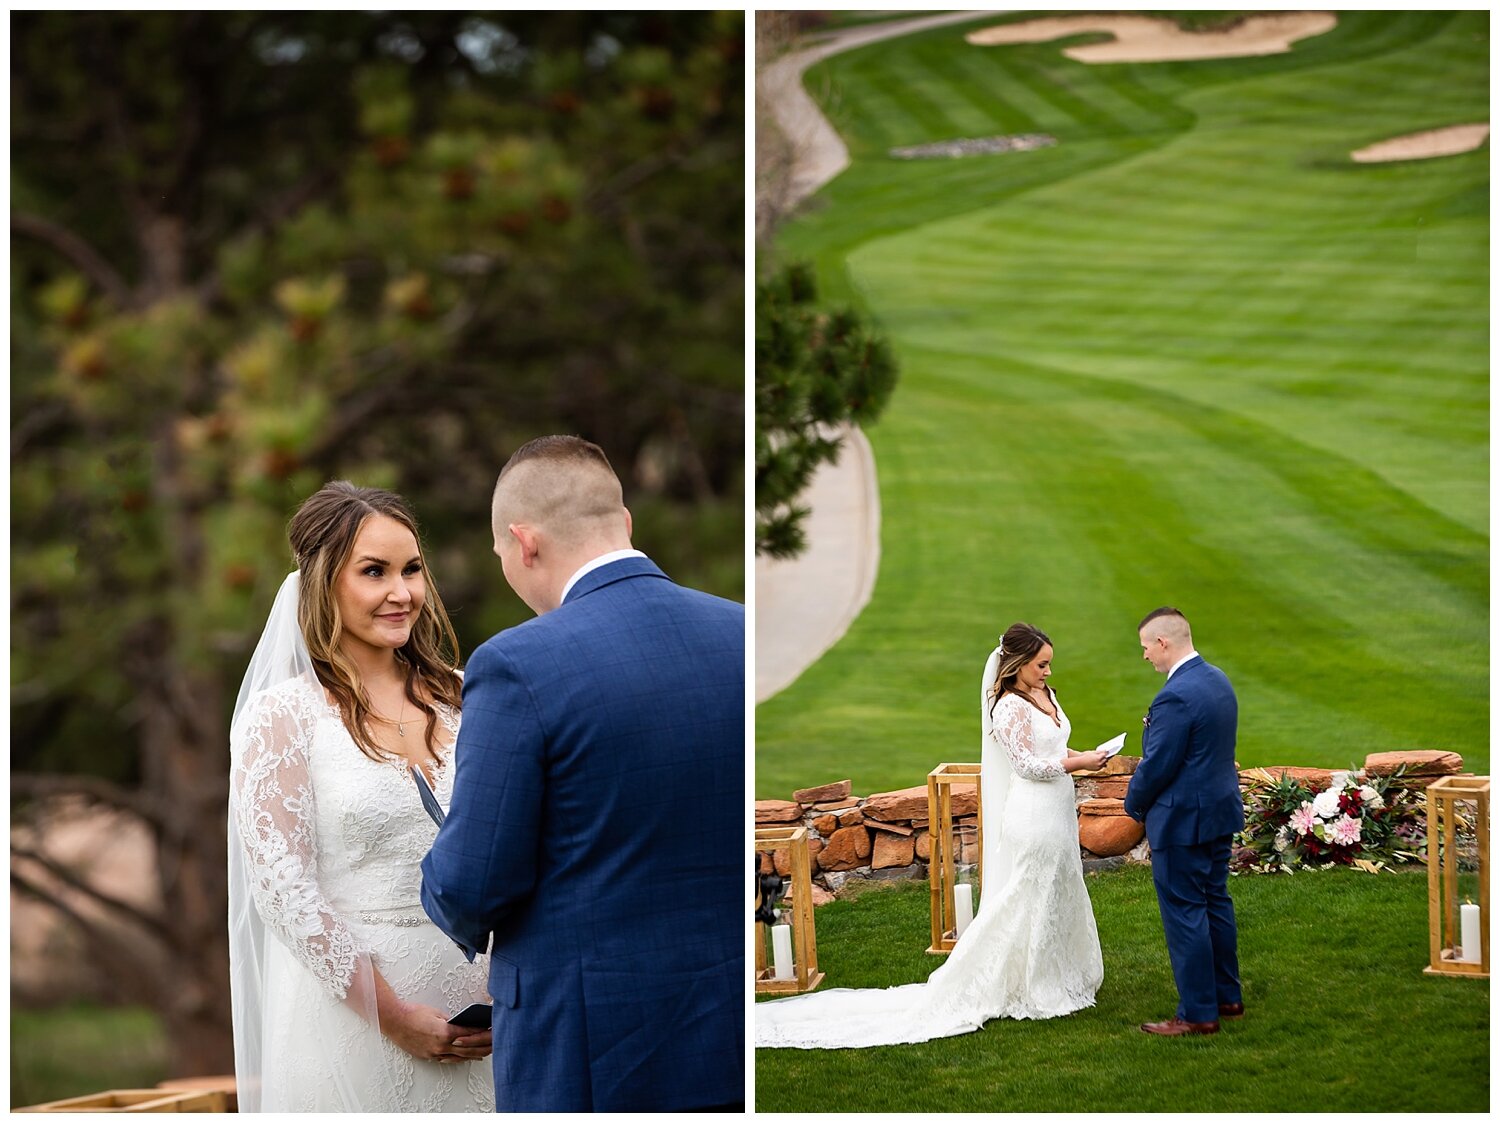 Molly and Nick's Wedding Day|Arrowhead Golf Course Elopement_0043.jpg